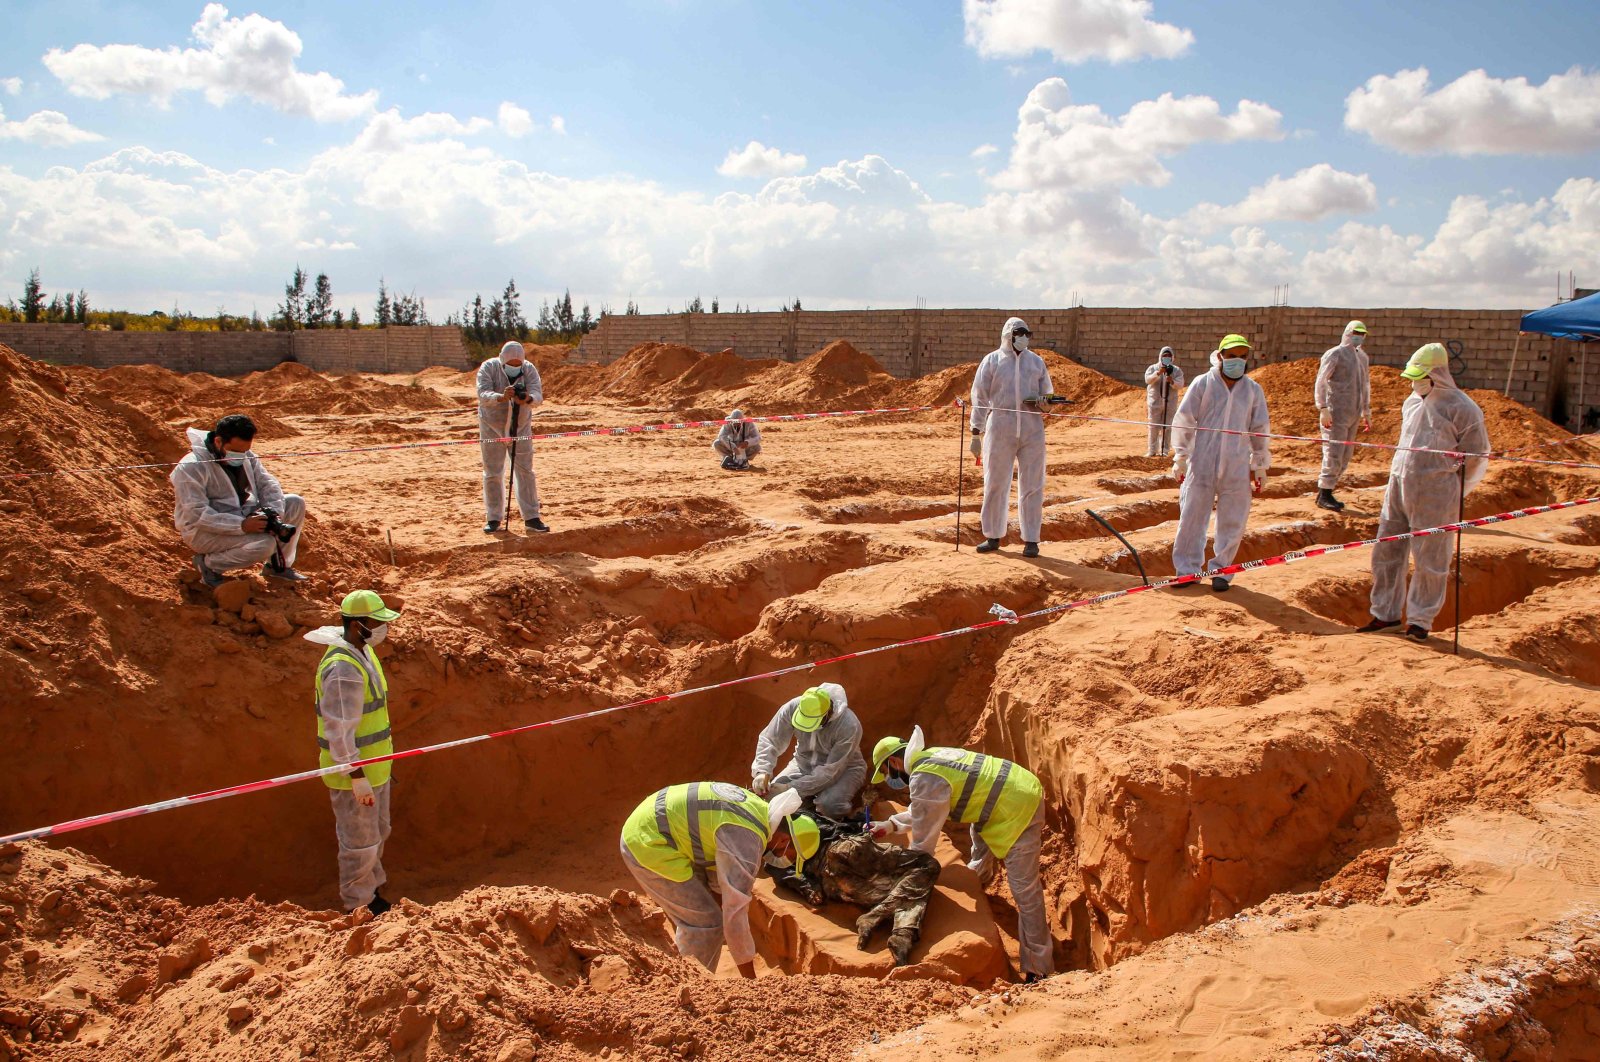 Members of a public body, which is backed by the UN-recognized Government of National Accord (GNA), unearth a body at a mass grave site in western Libya's Tarhuna region on Nov. 7, 2020. (AFP Photo)